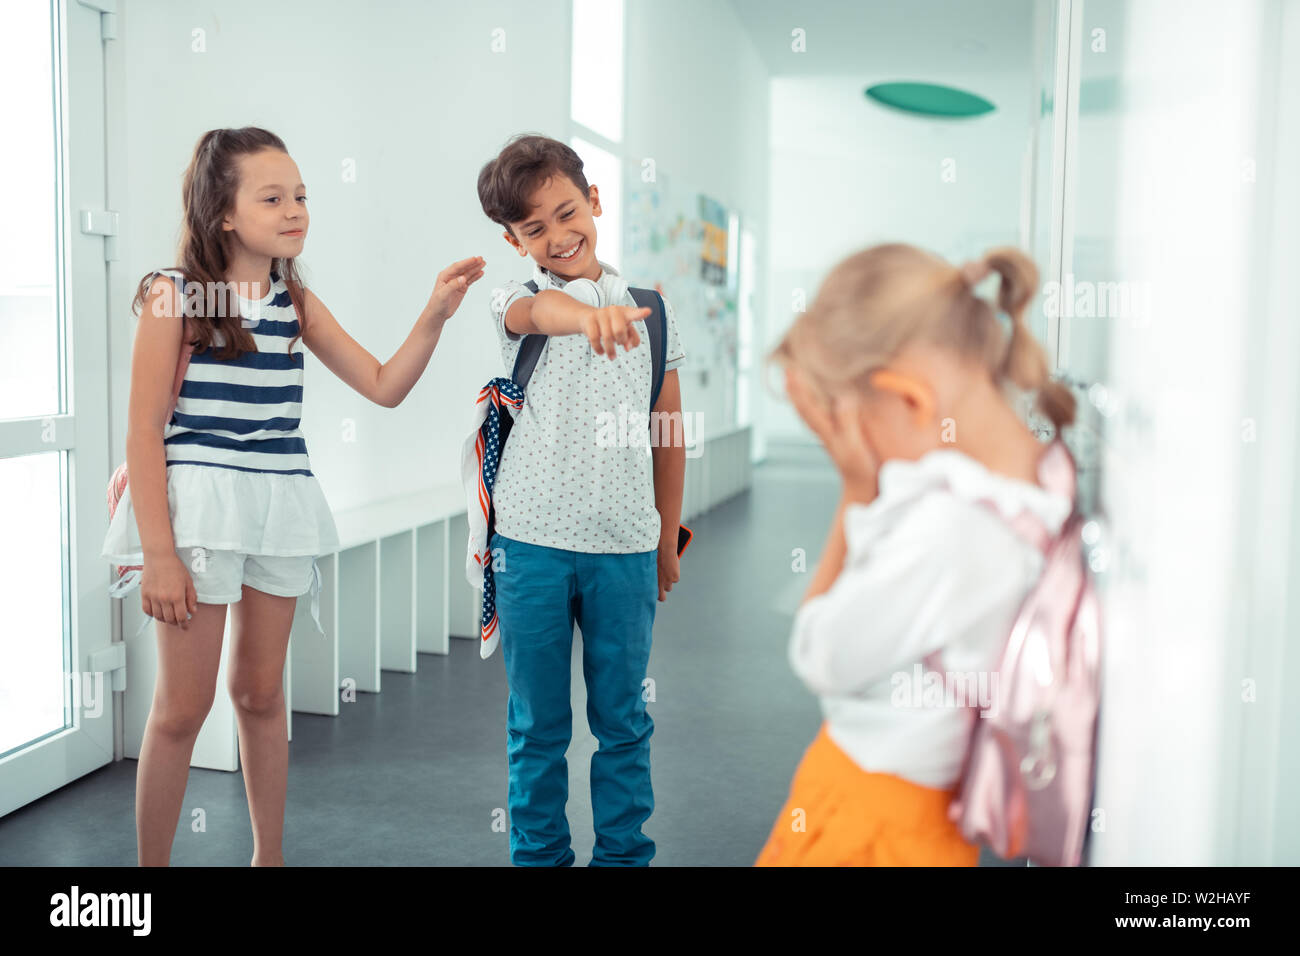 Rude boy and girl laughing at little blonde girl Stock Photo